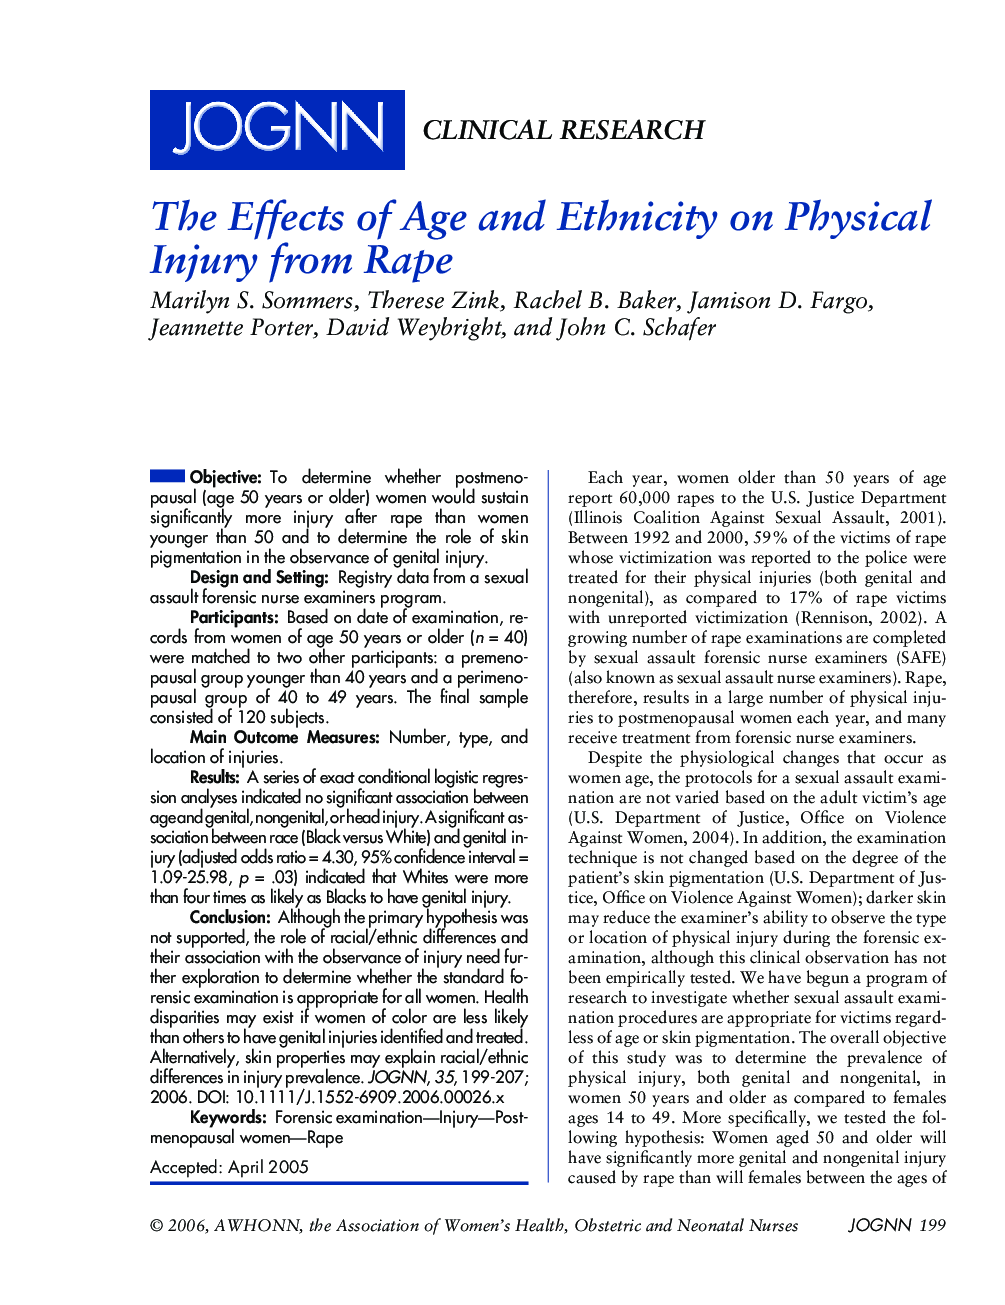 The Effects of Age and Ethnicity on Physical Injury from Rape